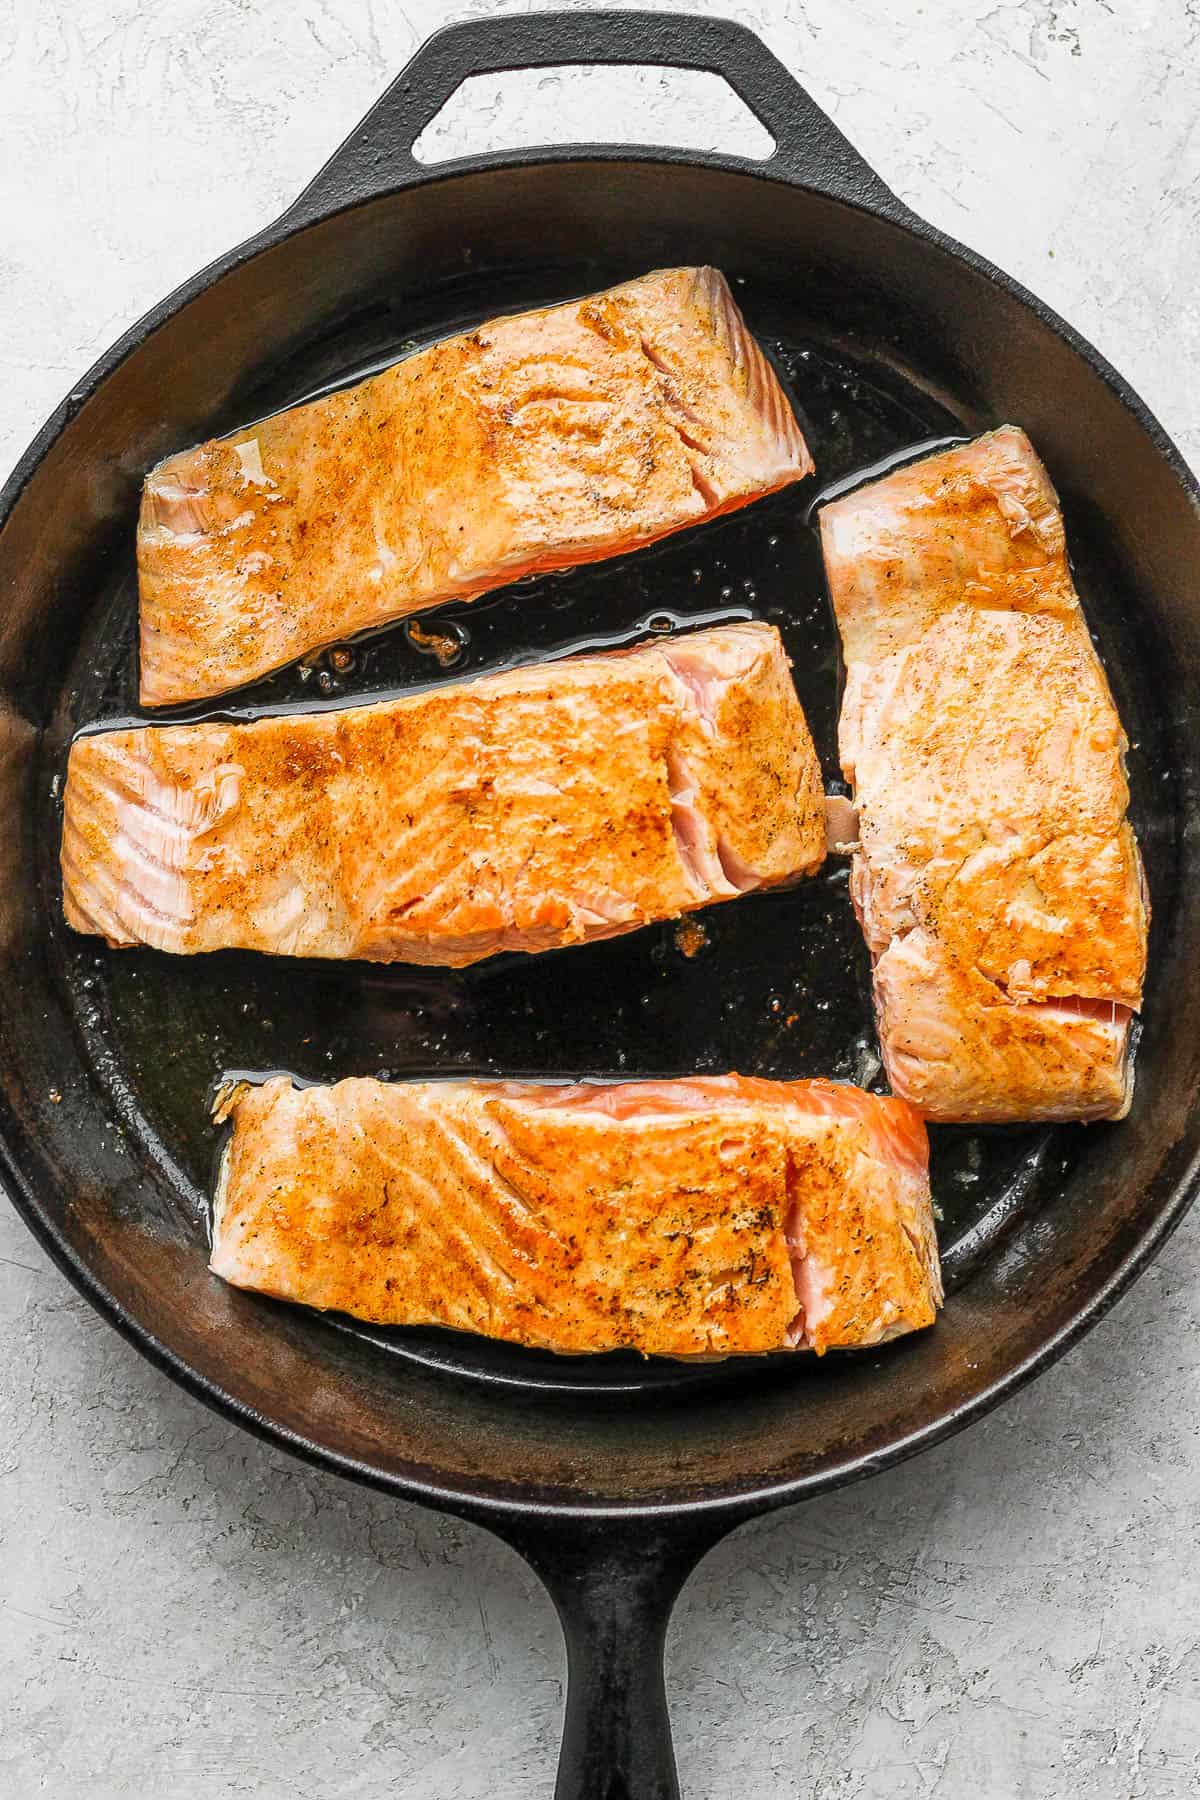 Four salmon filets in a cast iron skillet being seared.